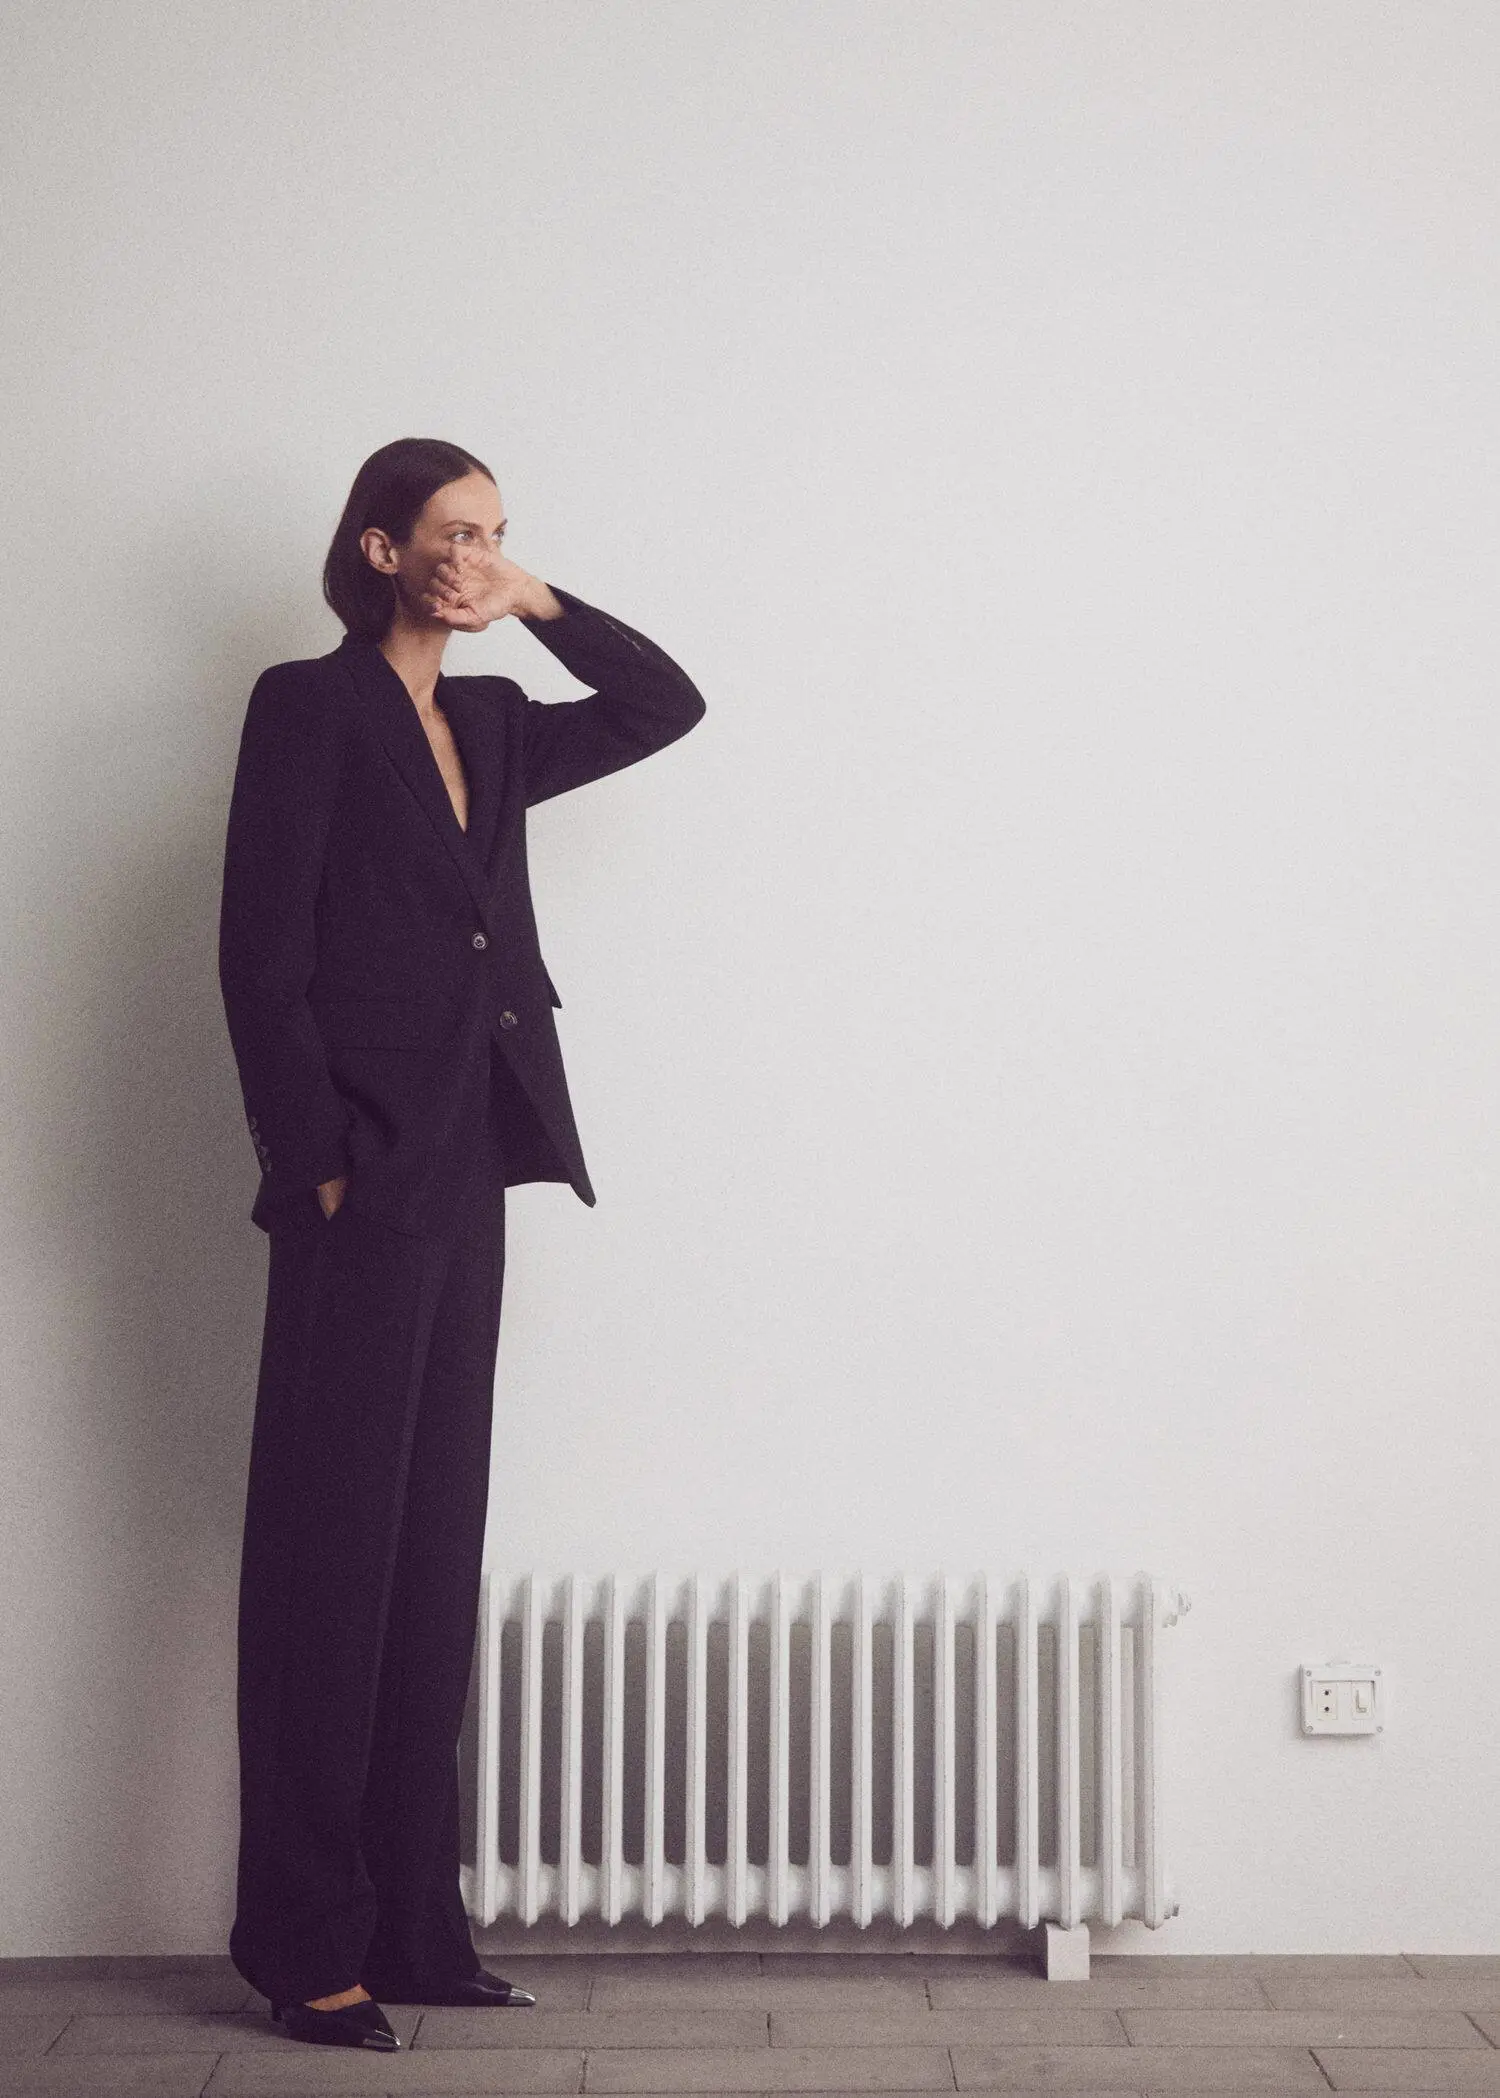 Mango Suit blazer with buttons. a woman standing in front of a radiator. 